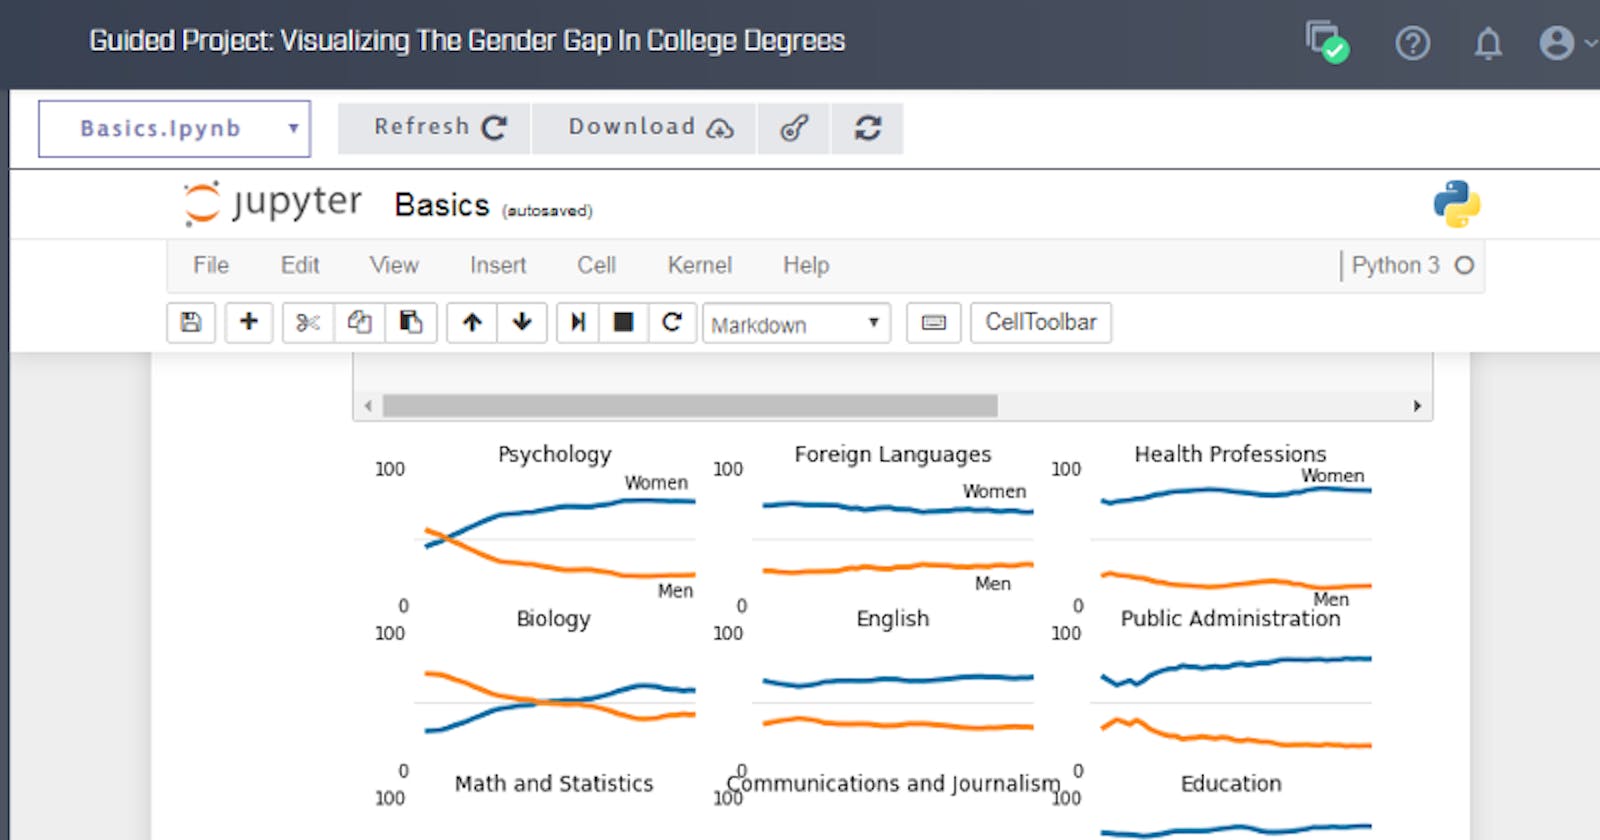 Self-learning path: Teaching myself Data Science on DataQuest.io